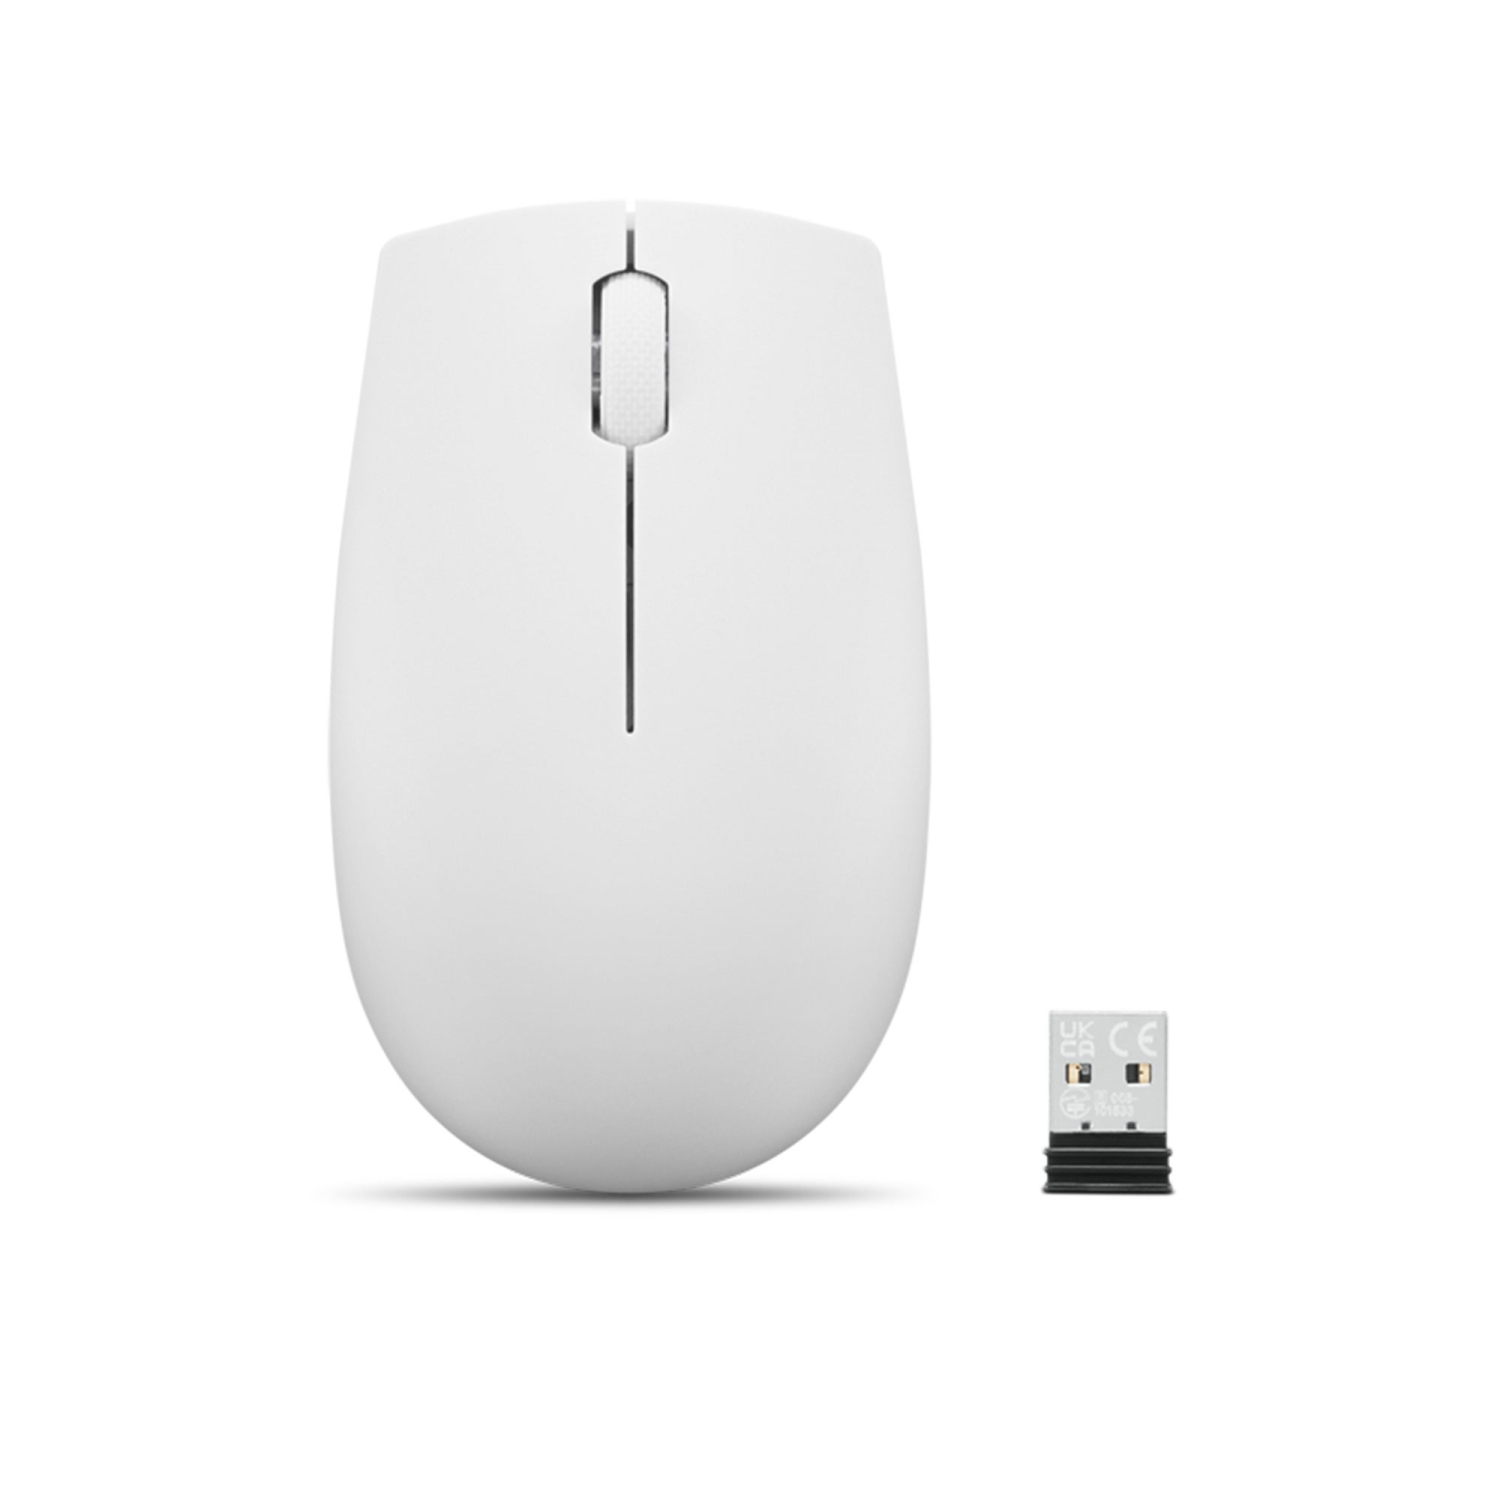 Lenovo 300 Wireless Compact Mouse (Cloud Grey) with battery